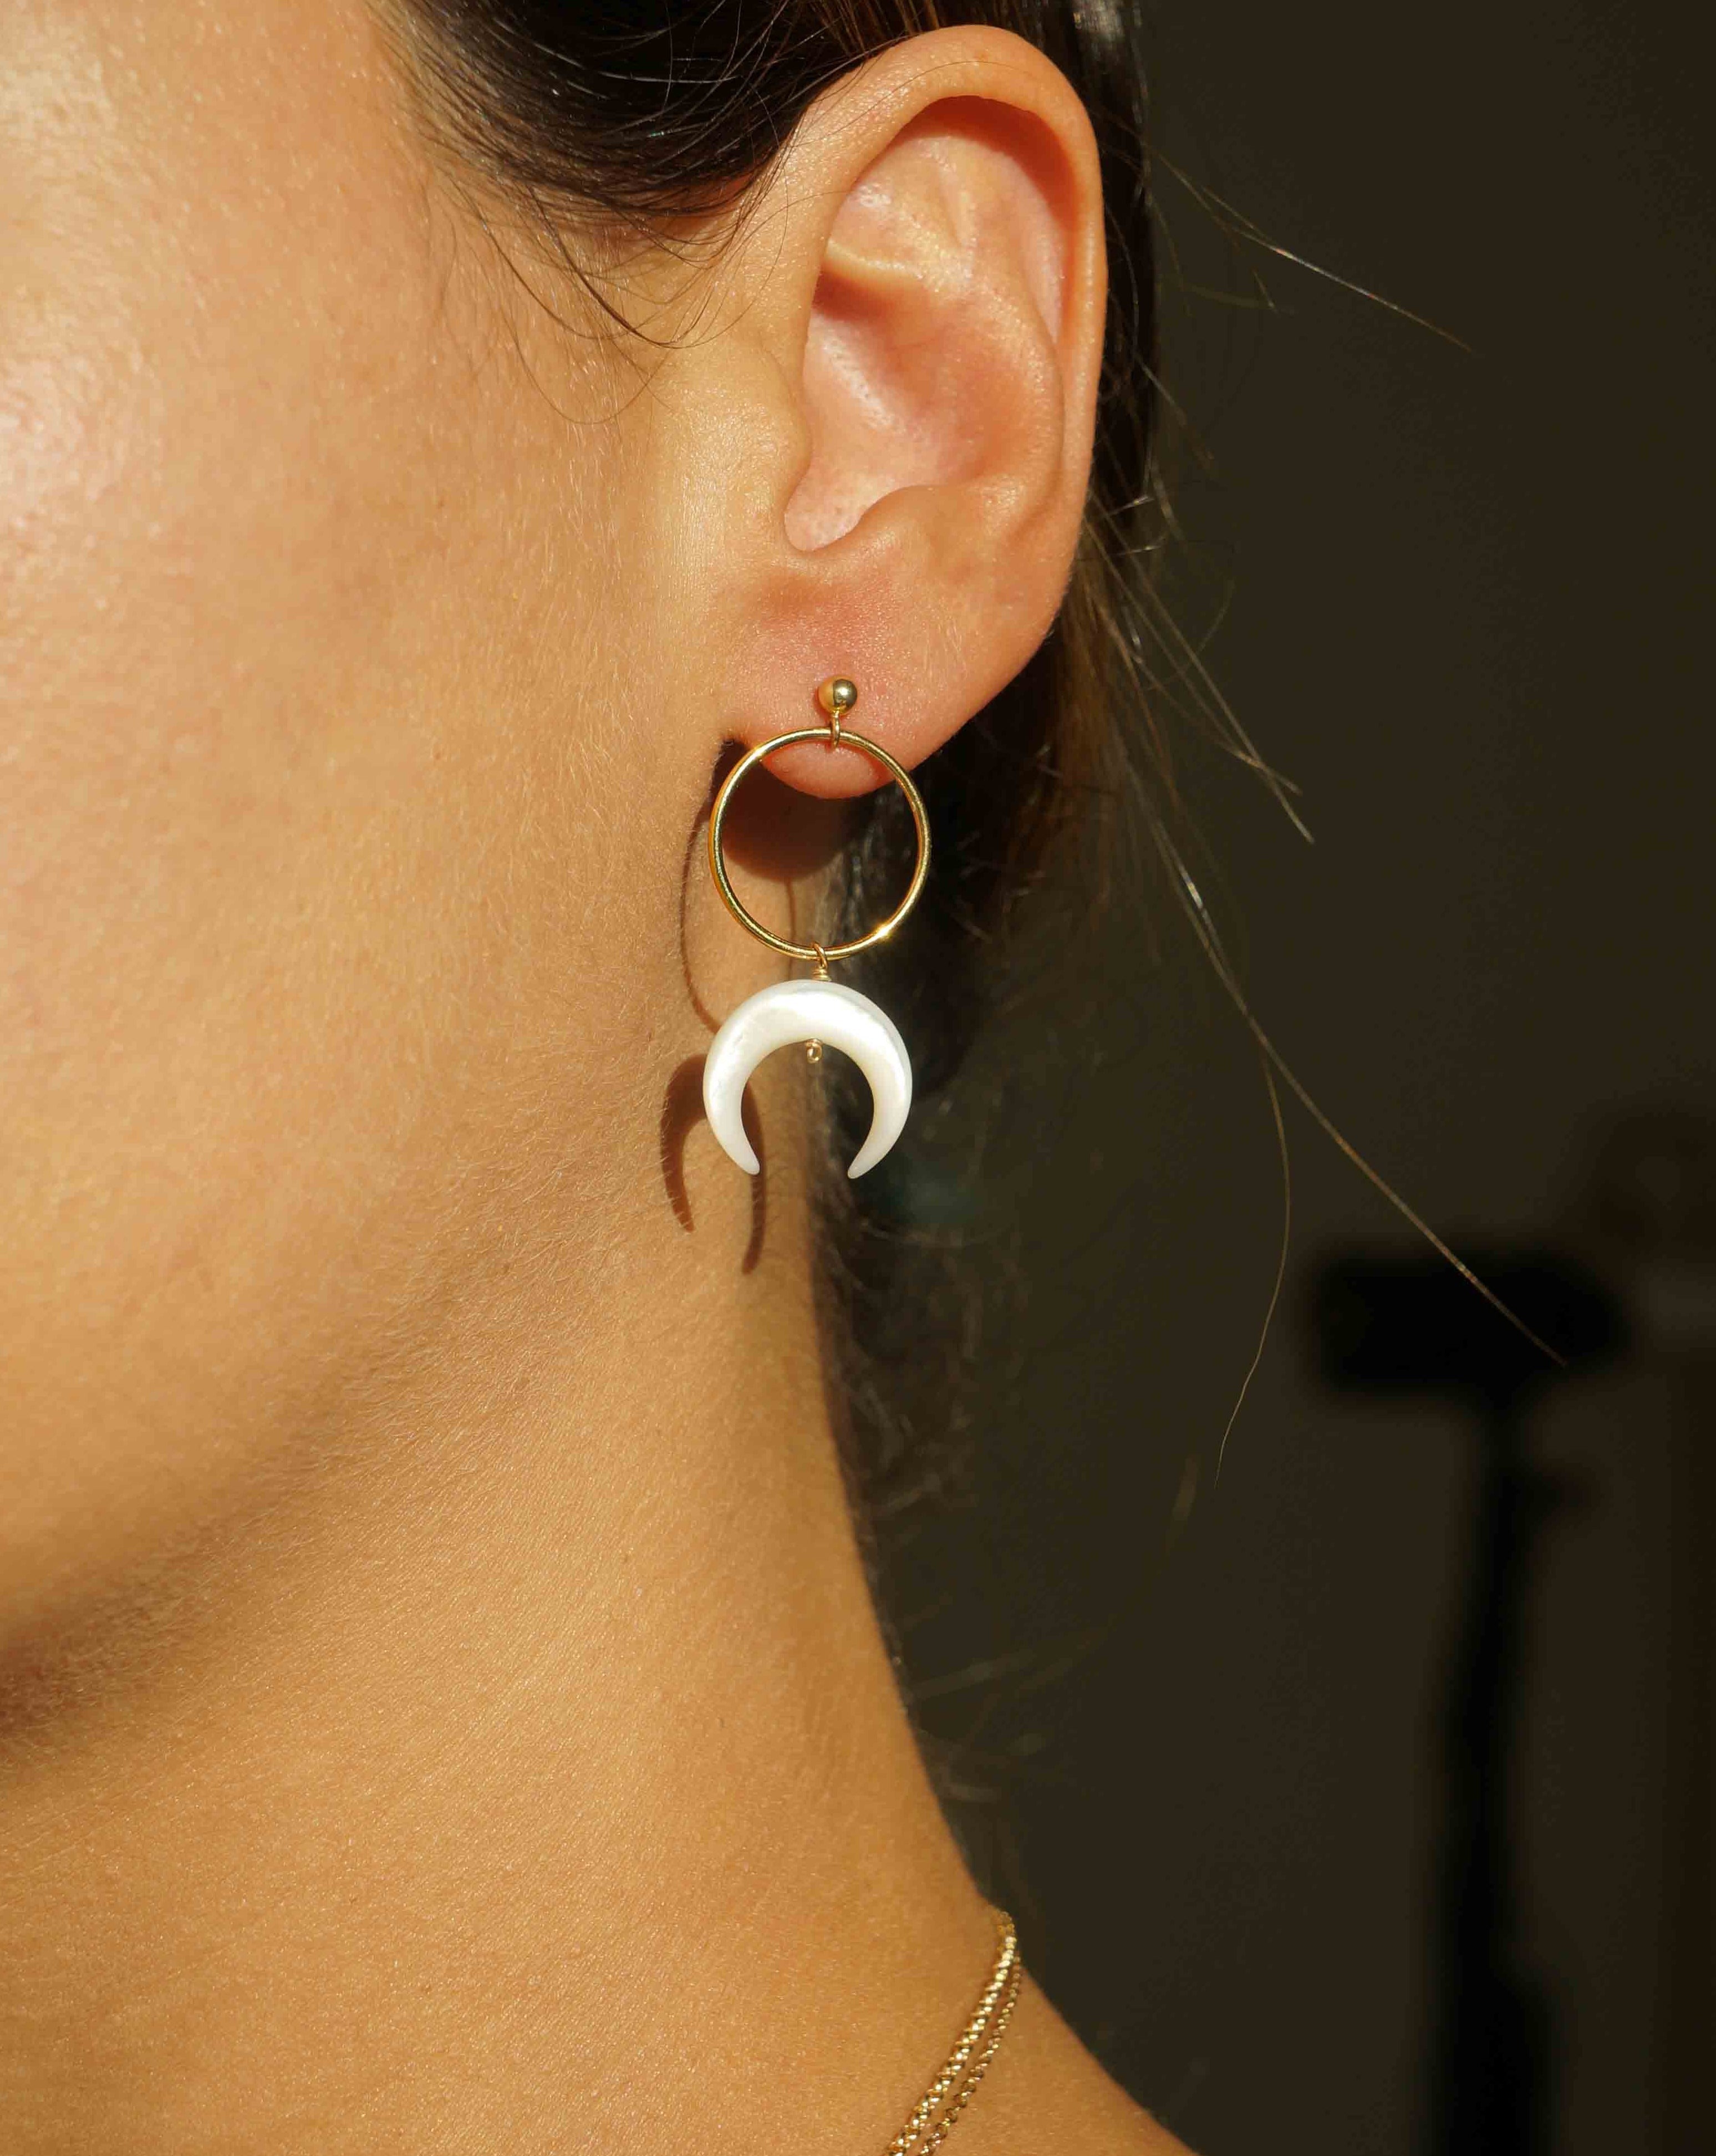 Baques Earrings by KOZAKH. Dangling earrings in 14K Gold Filled, featuring a hand-carved Mother of Pearl moon charm.